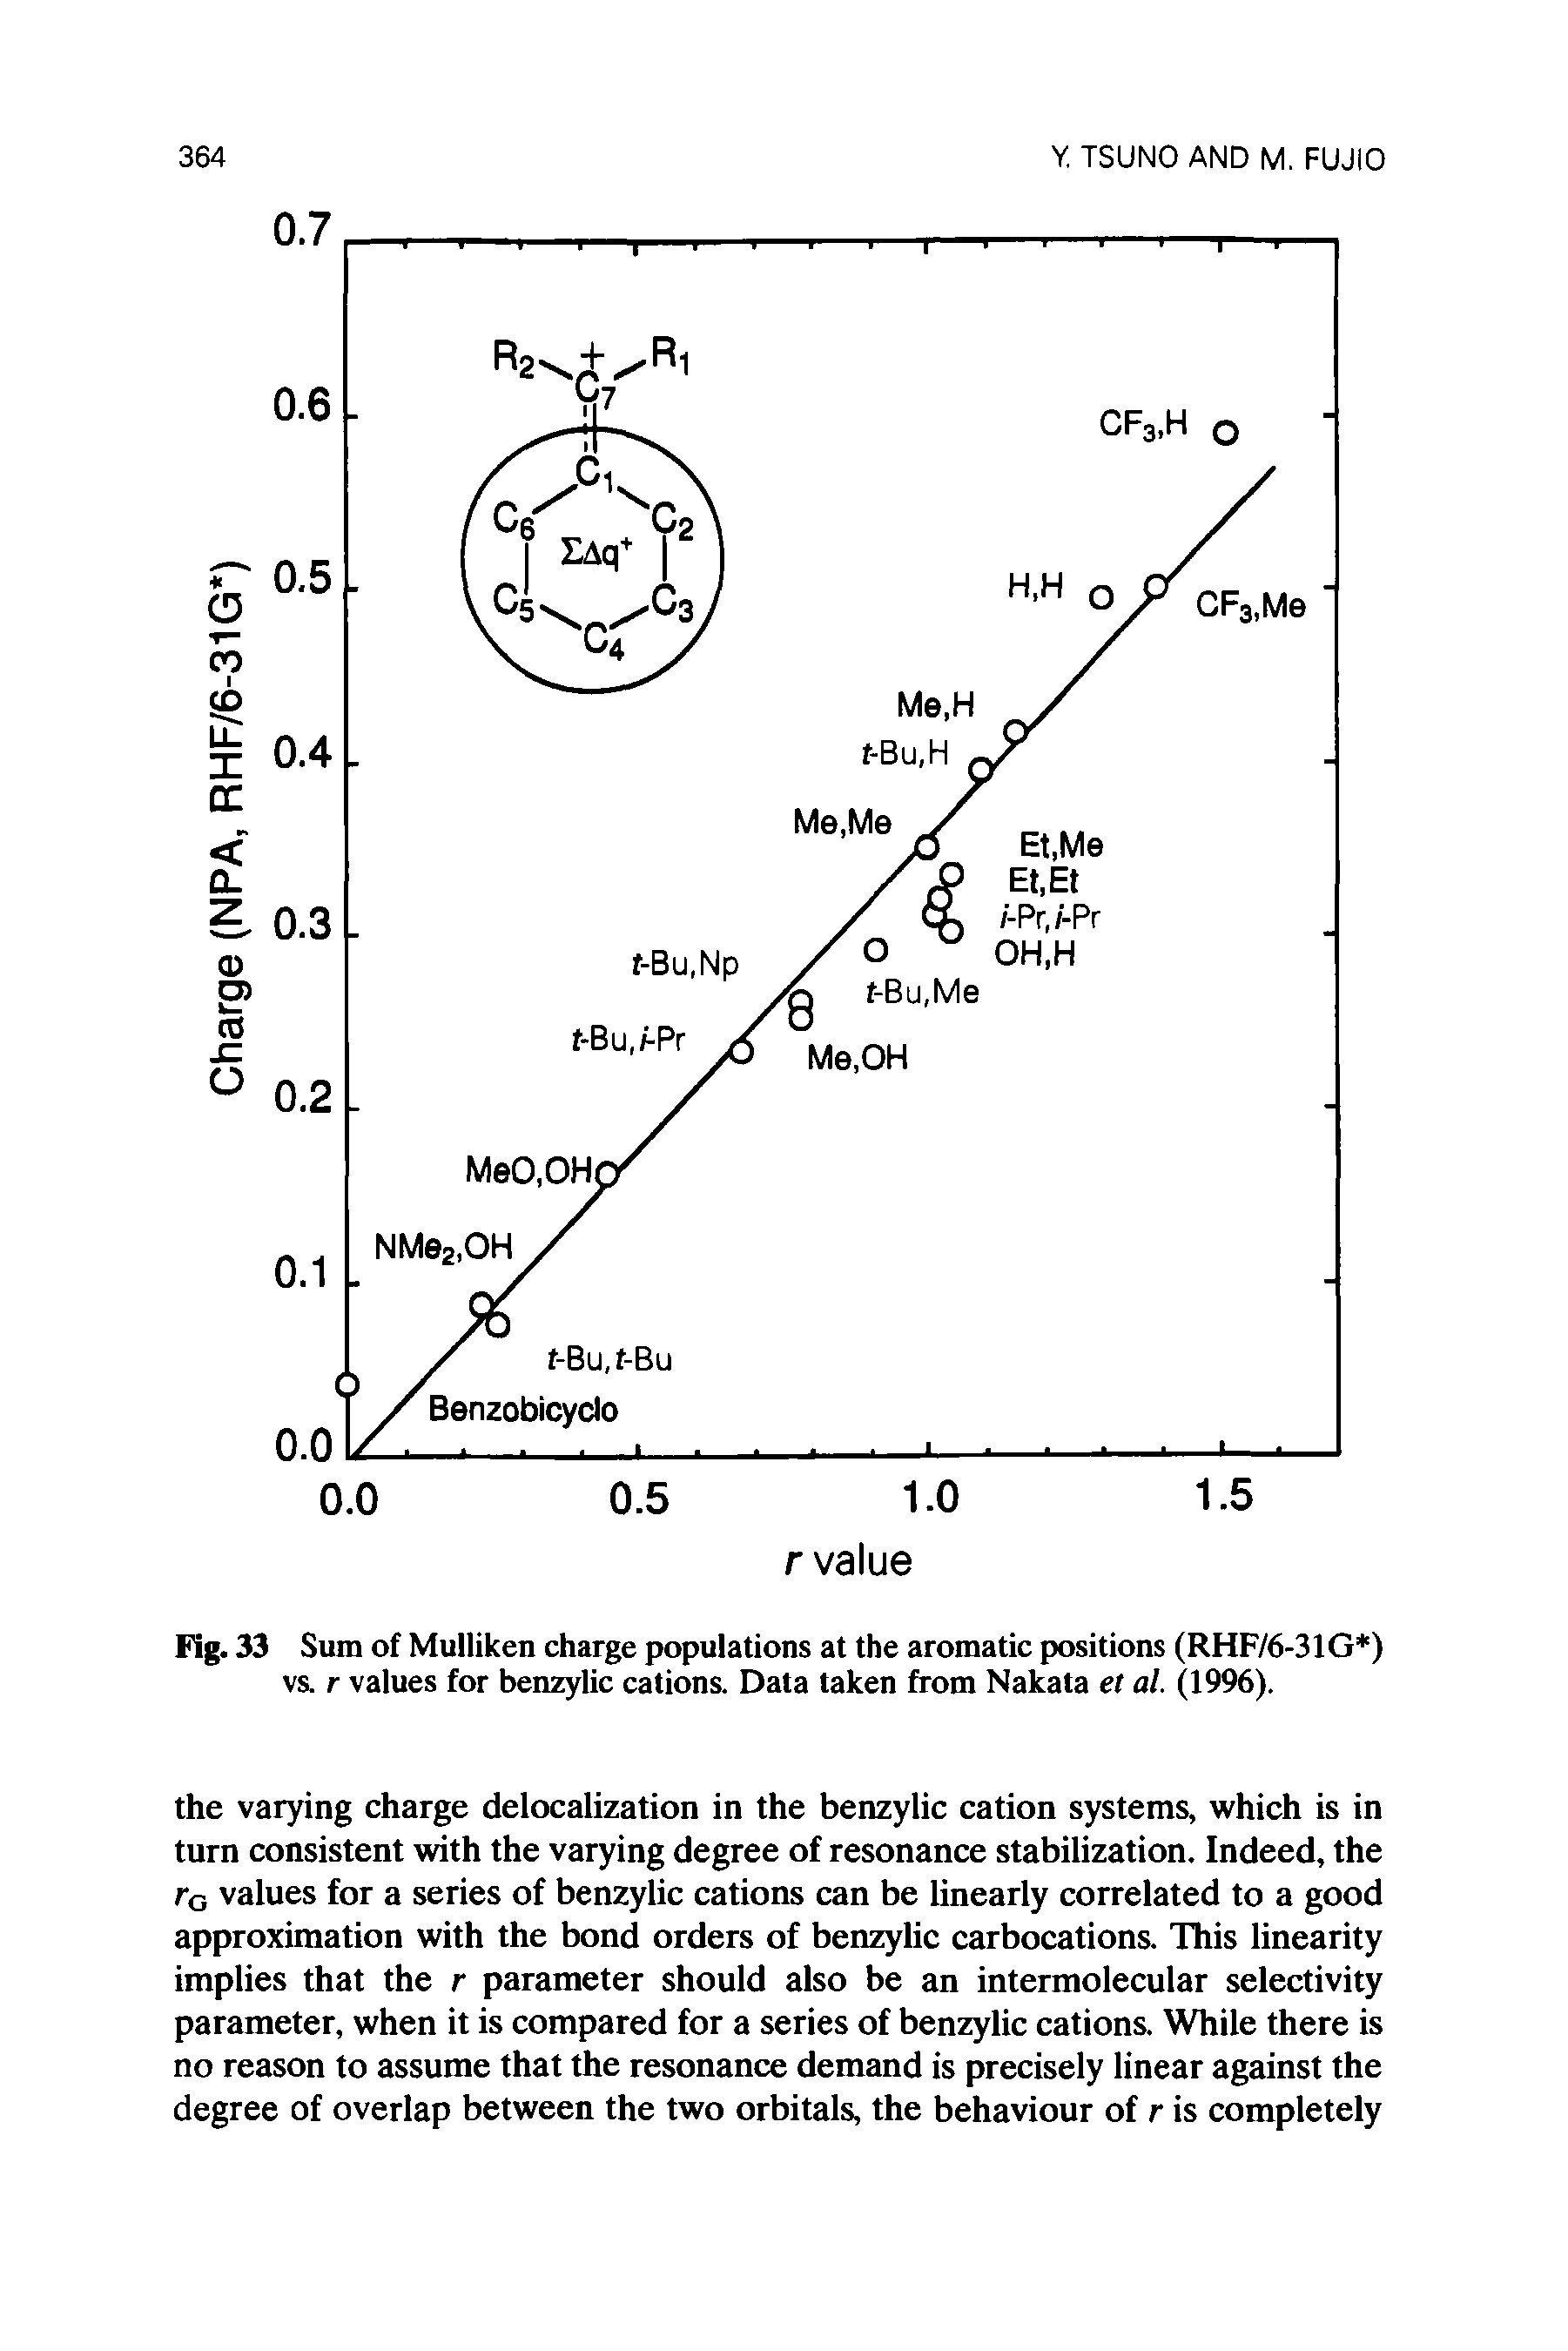 Fig. 33 Sum of Mulliken charge populations at the aromatic positions (RHF/6-31G ) vs. r values for benzylic cations. Data taken from Nakata et al. (1996).